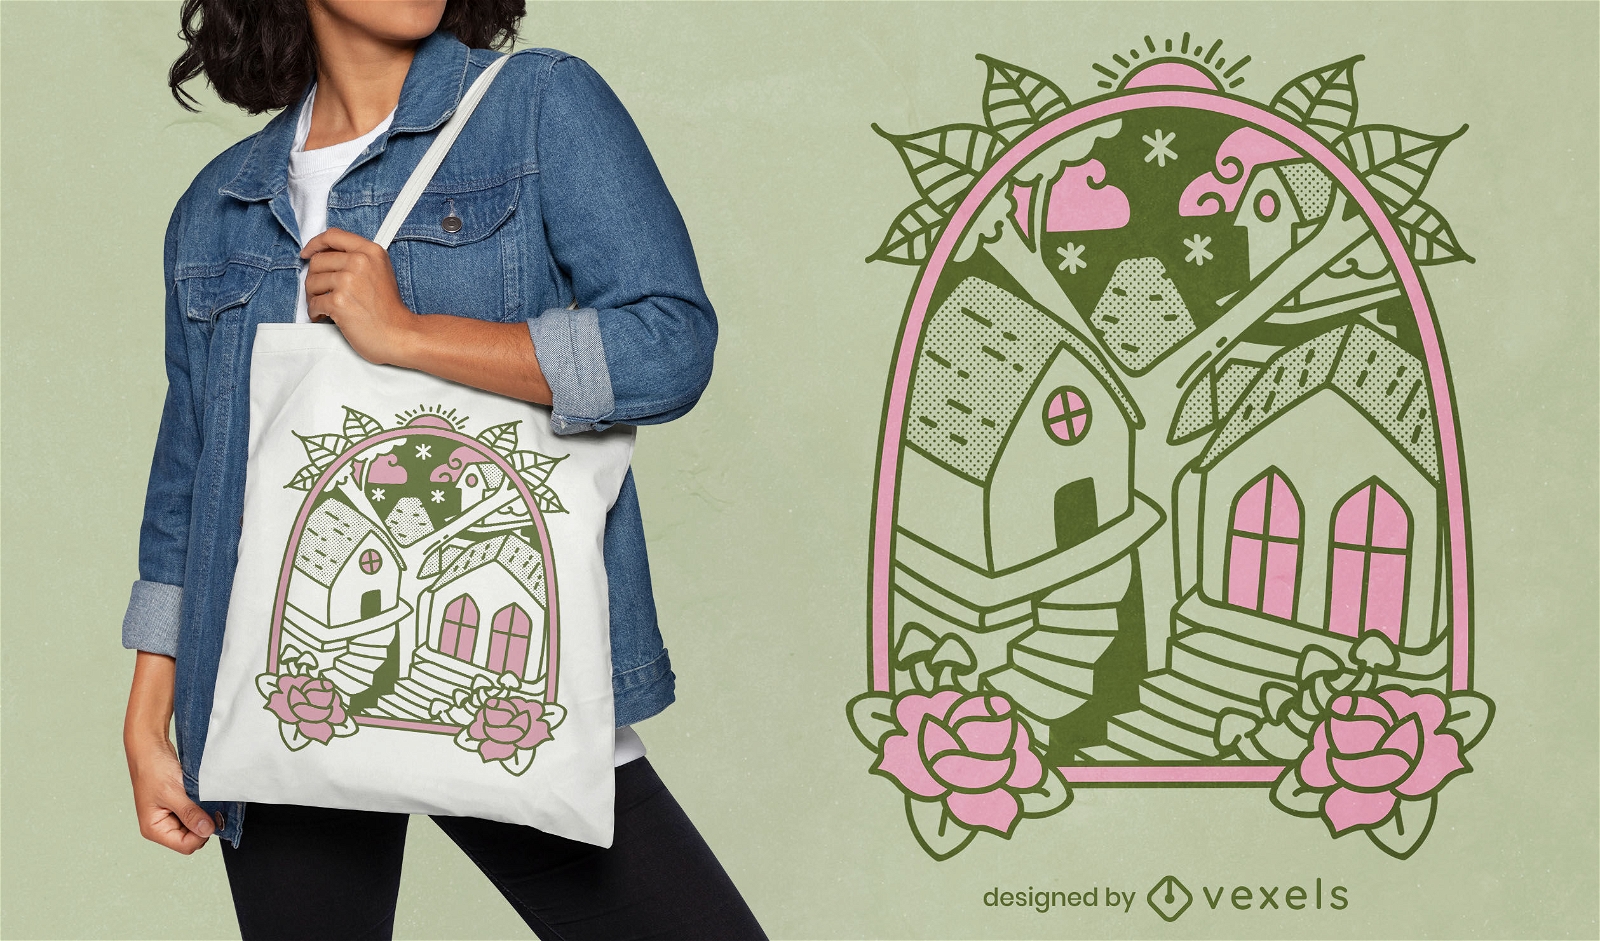 Window to houses in trees tote bag design